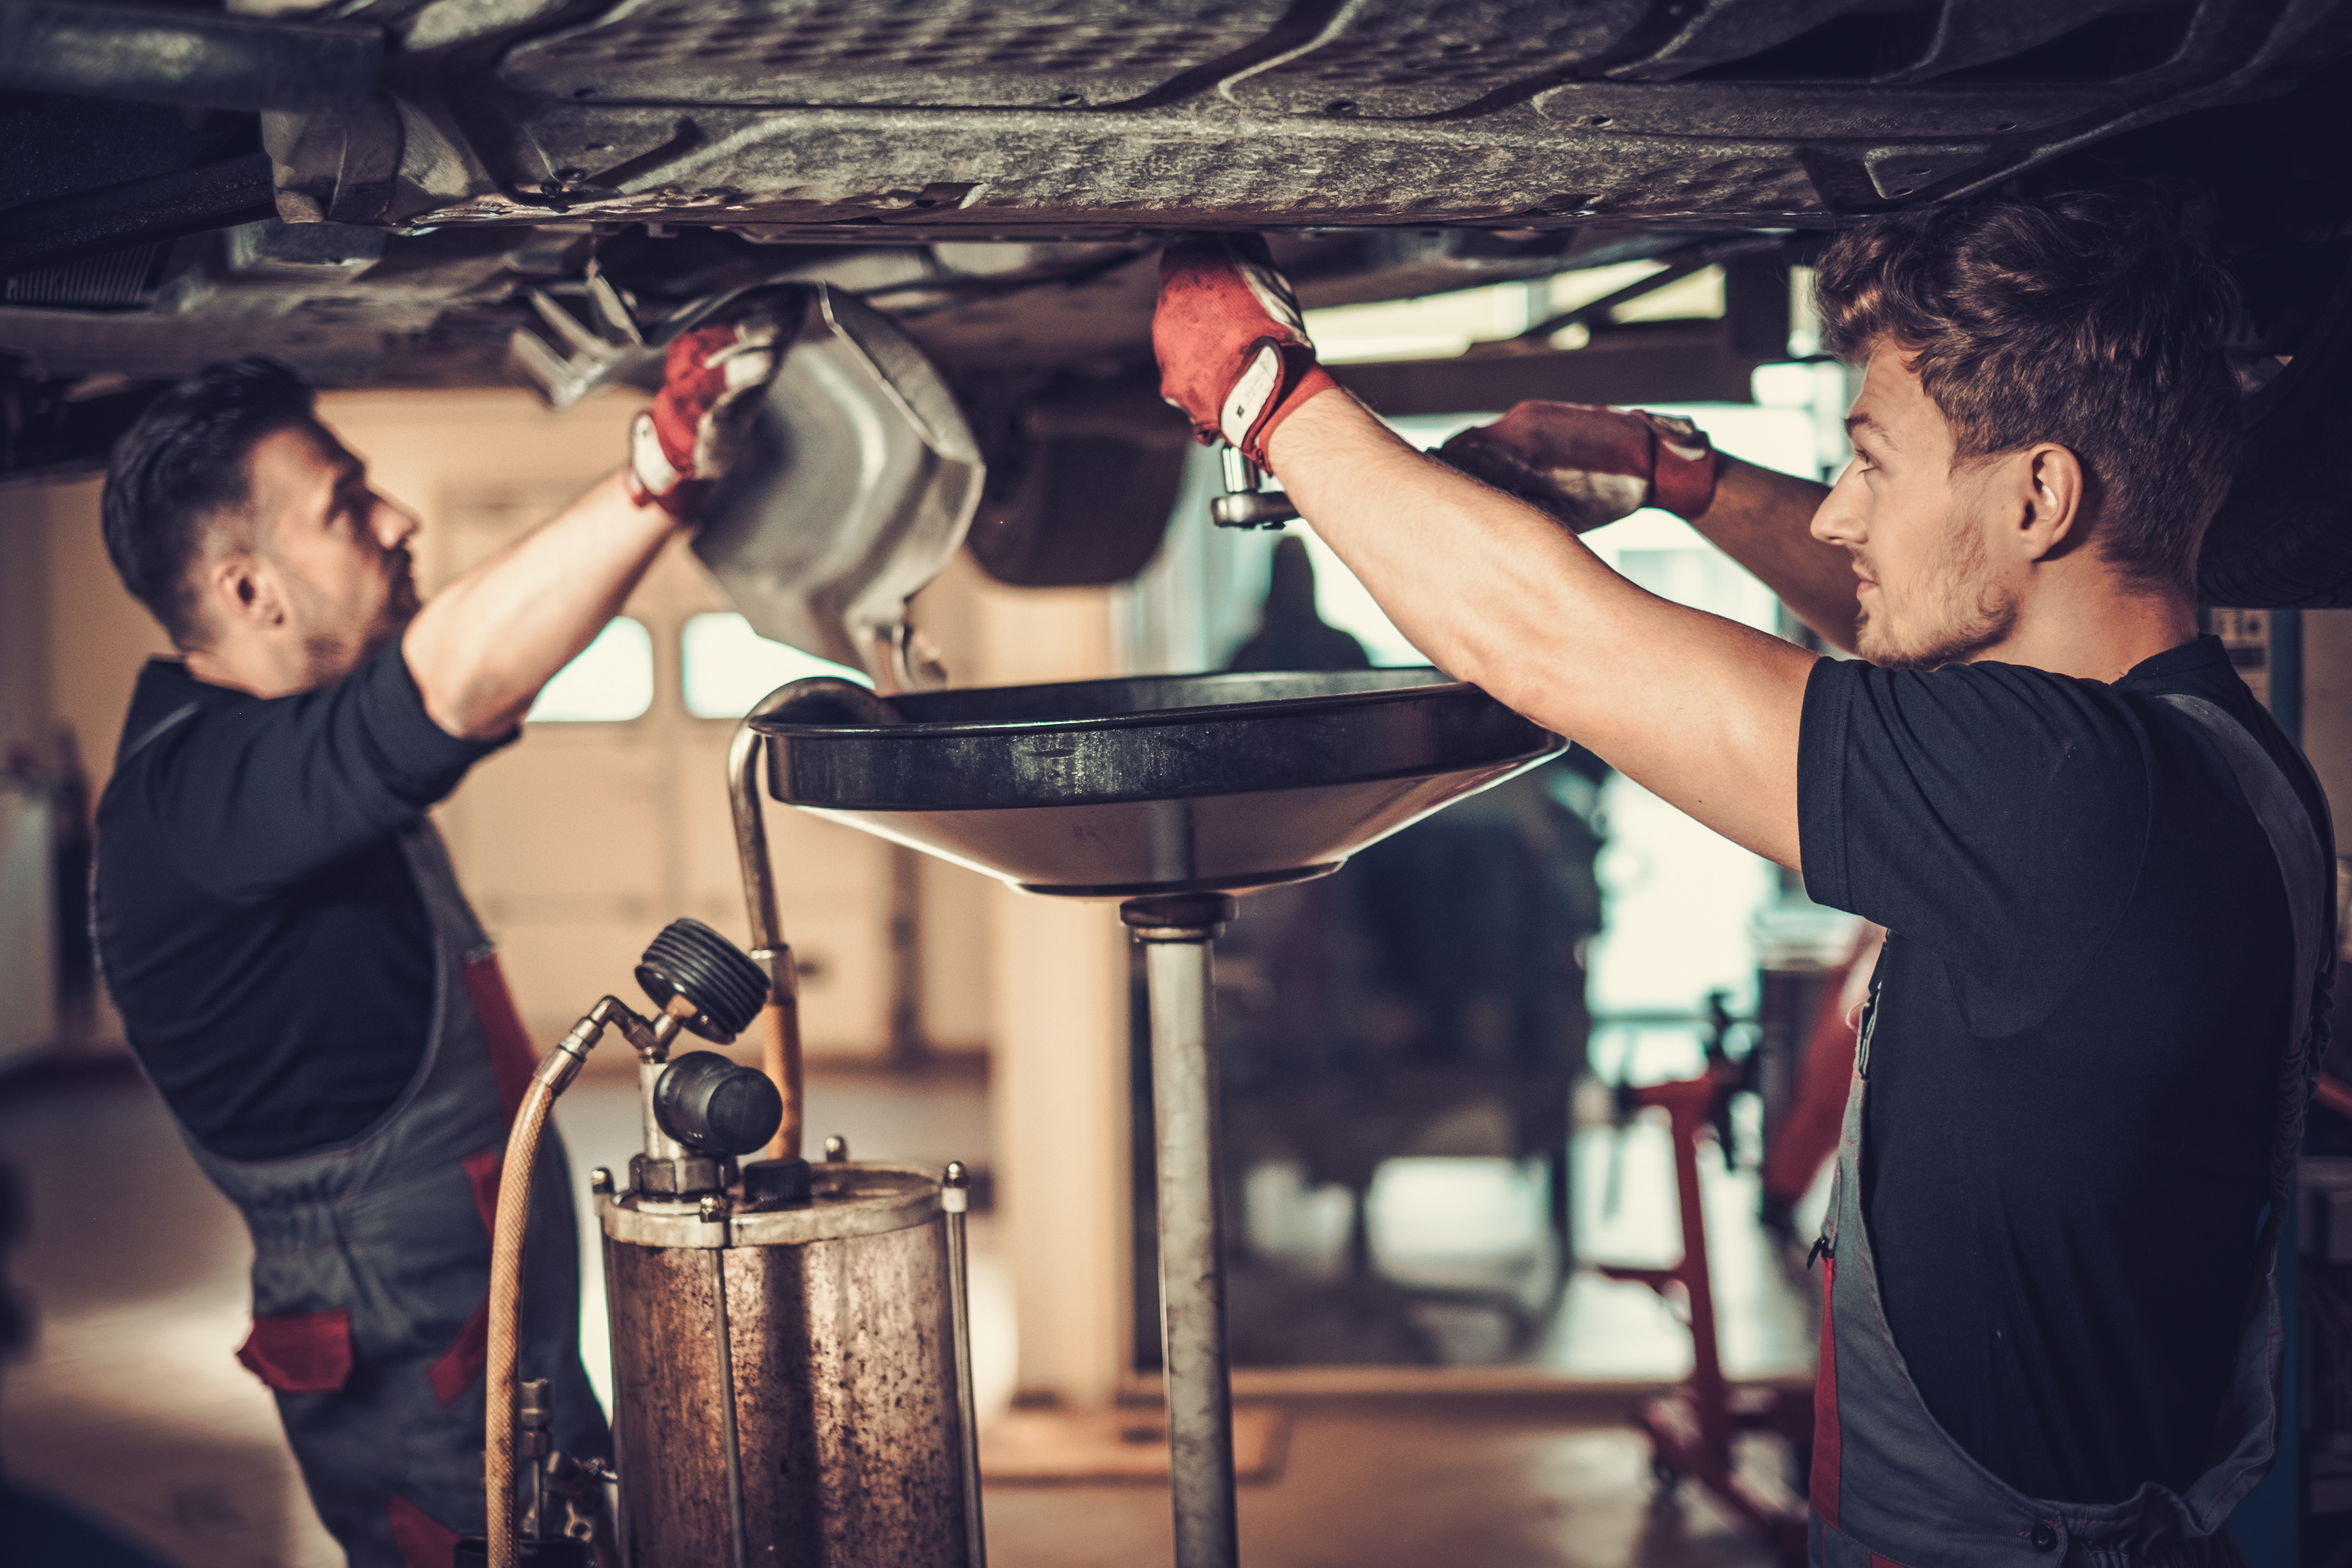 Profecional car mechanic changing motor oil in automobile engine at maintenance repair service station in a car workshop | Source: Shutterstock